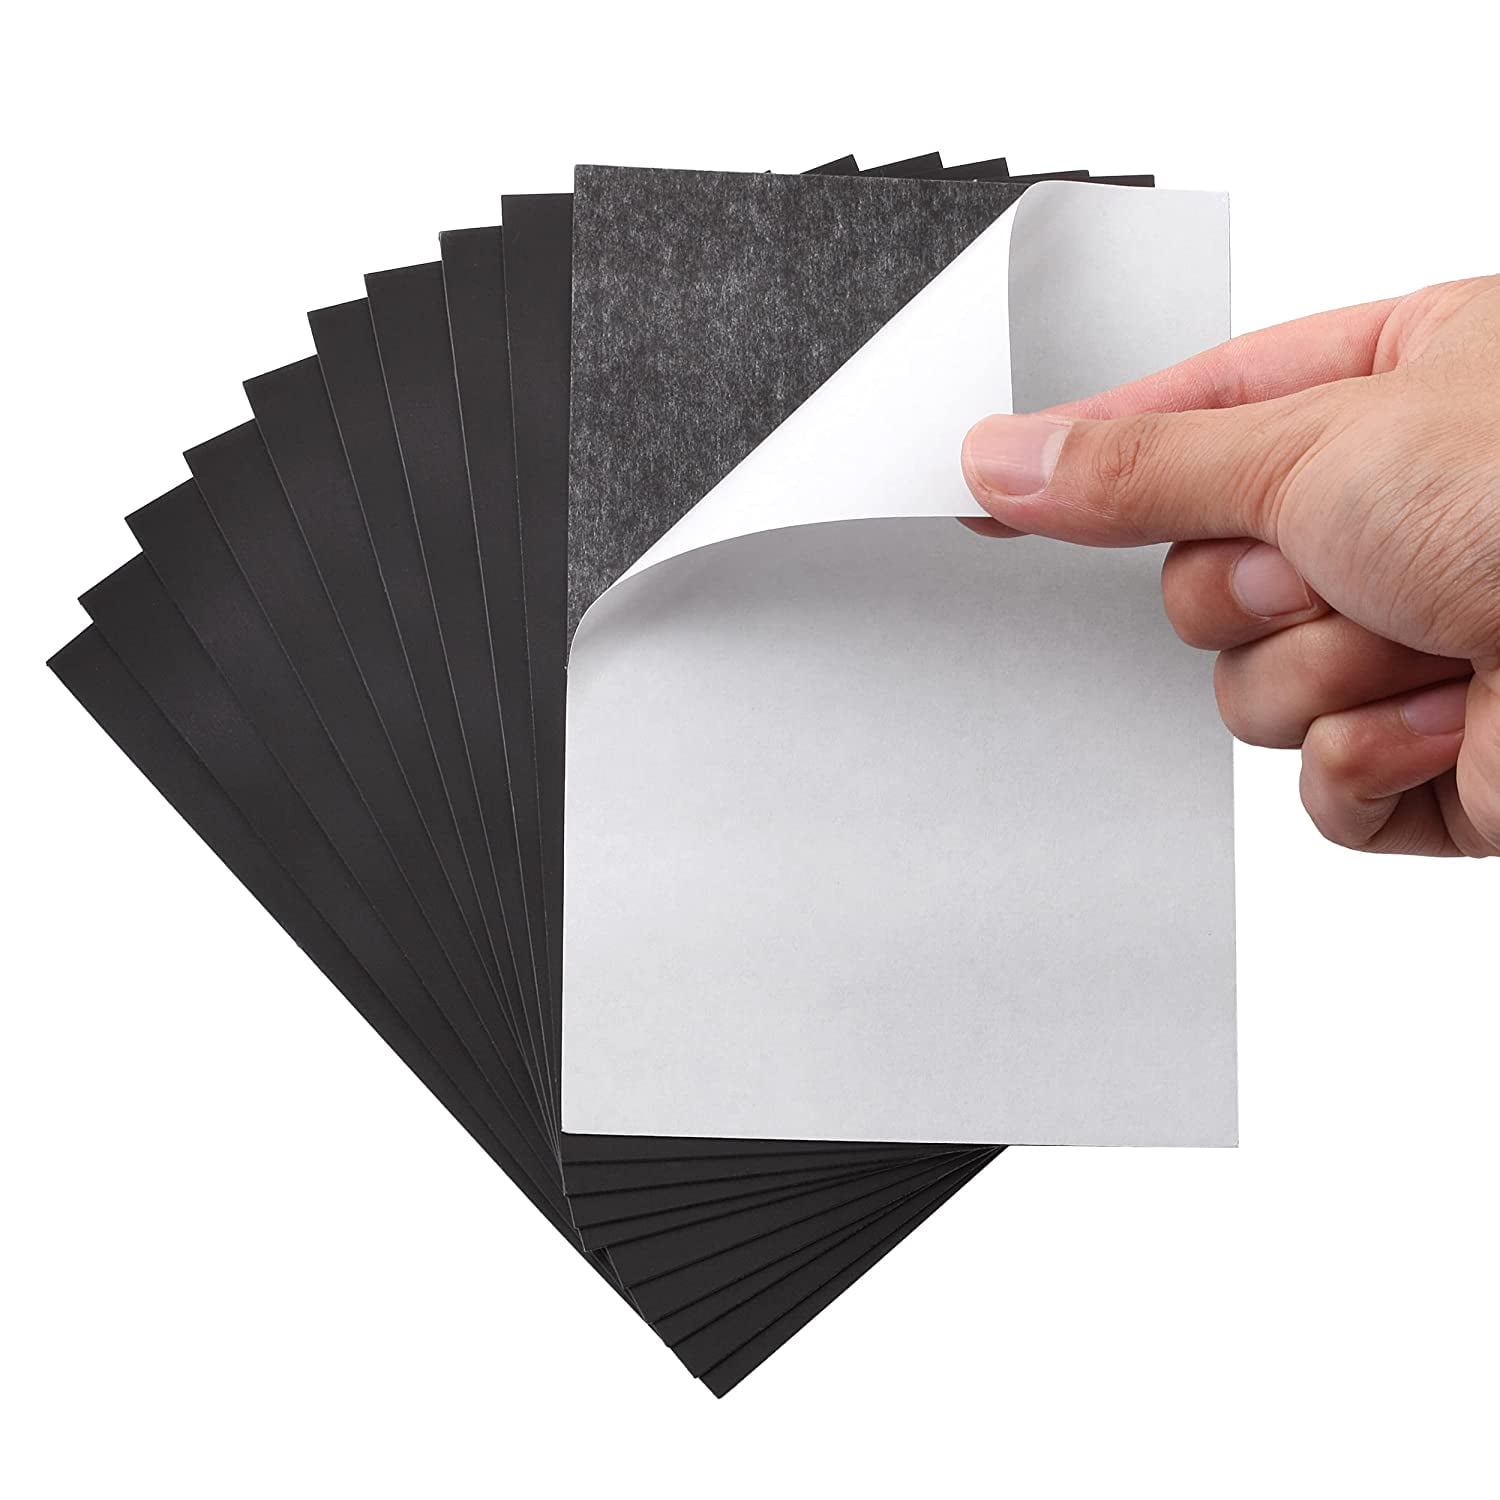 8 x 16" x 11" Sheet  light weight flexible 20 mil Magnet Blank QUALITY Magnetic 